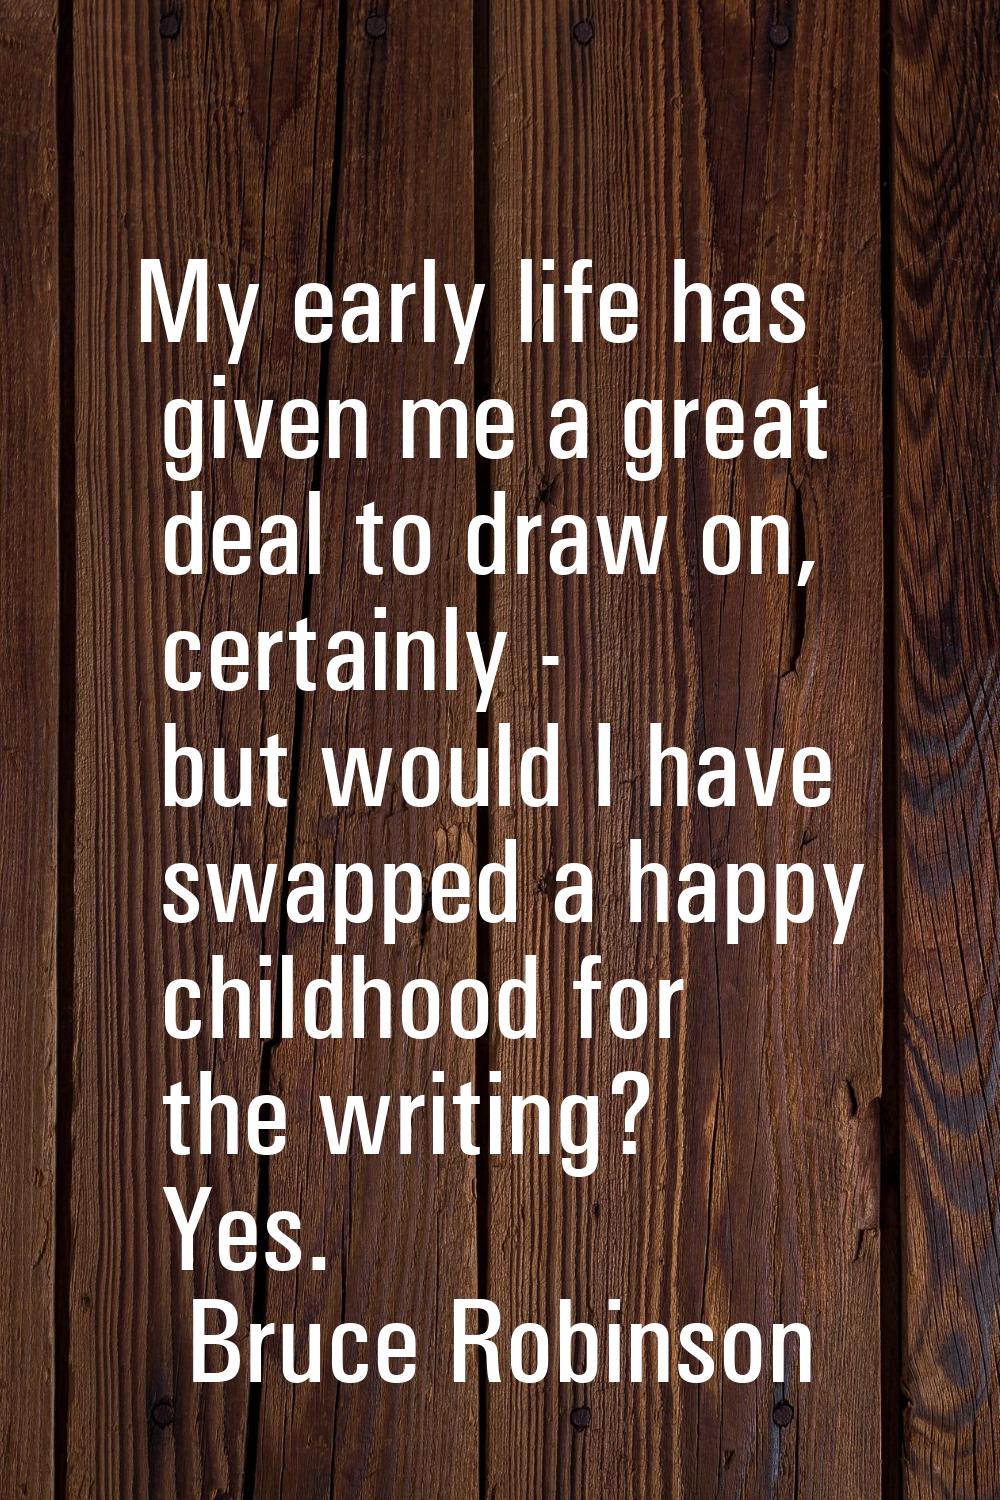 My early life has given me a great deal to draw on, certainly - but would I have swapped a happy ch